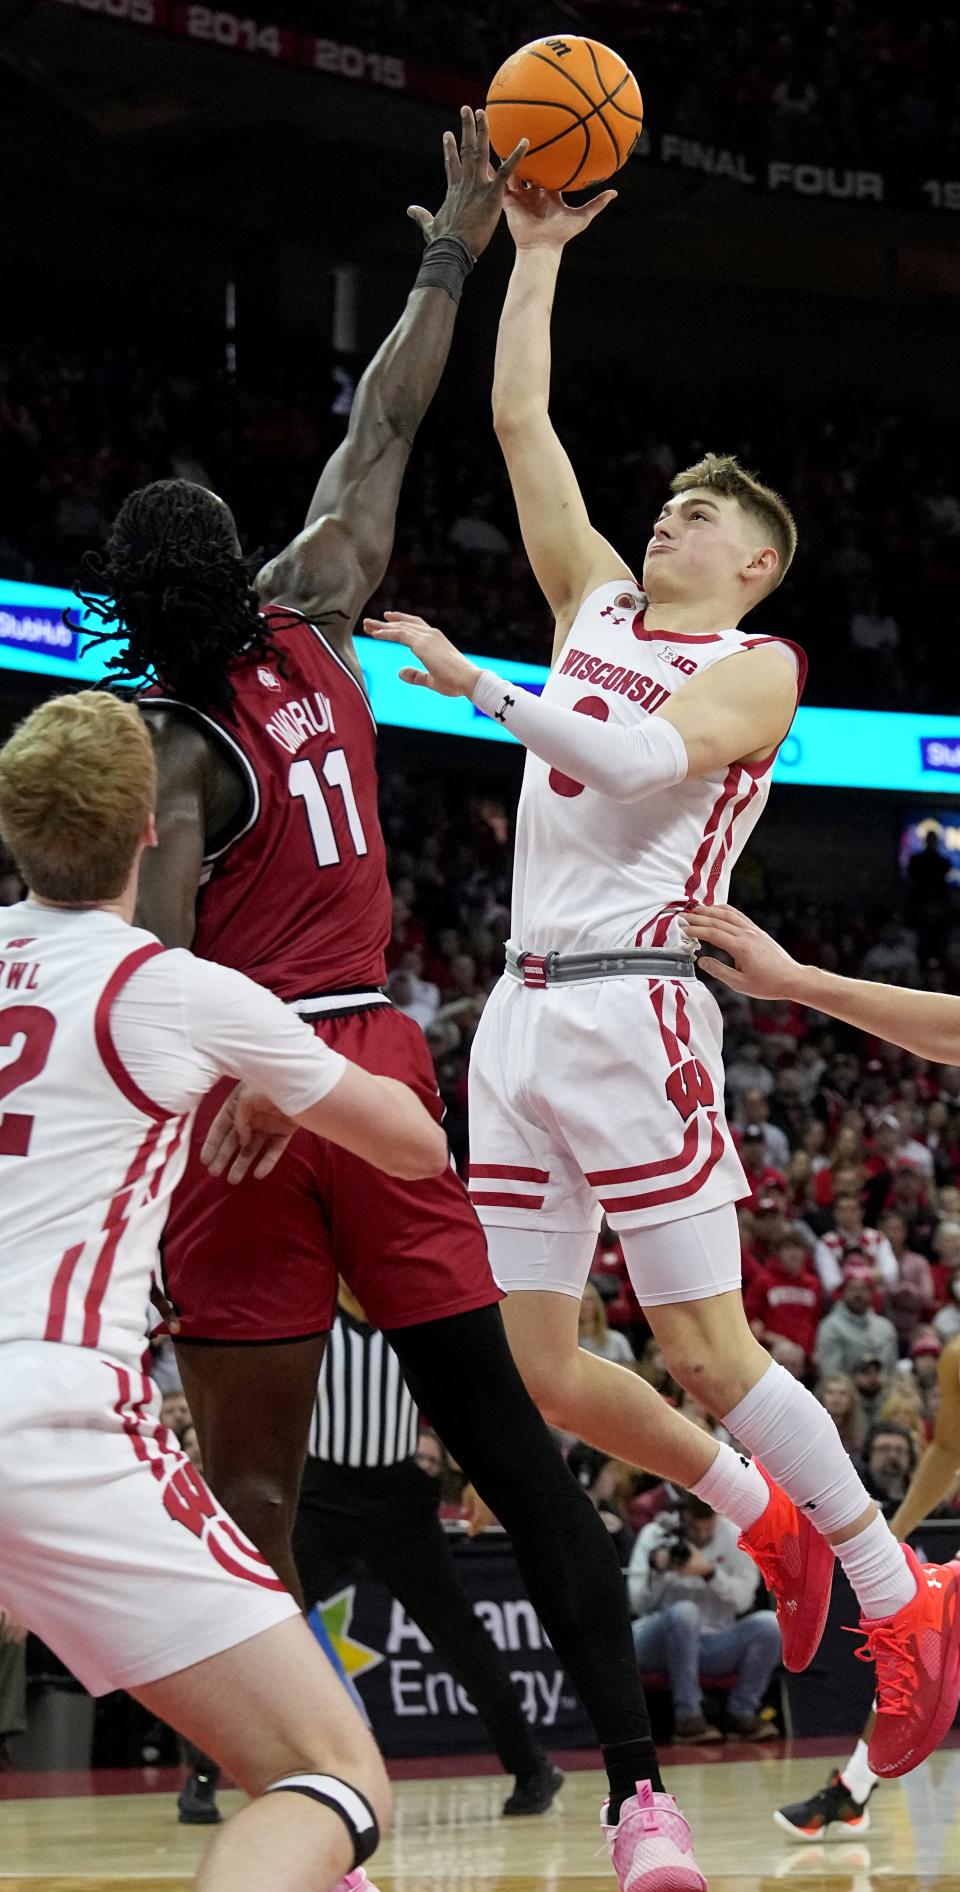 Wisconsin guard Connor Essegian misses a shot over over Rutgers center Clifford Omoruyi in the closing moments Saturday at the Kohl Center.